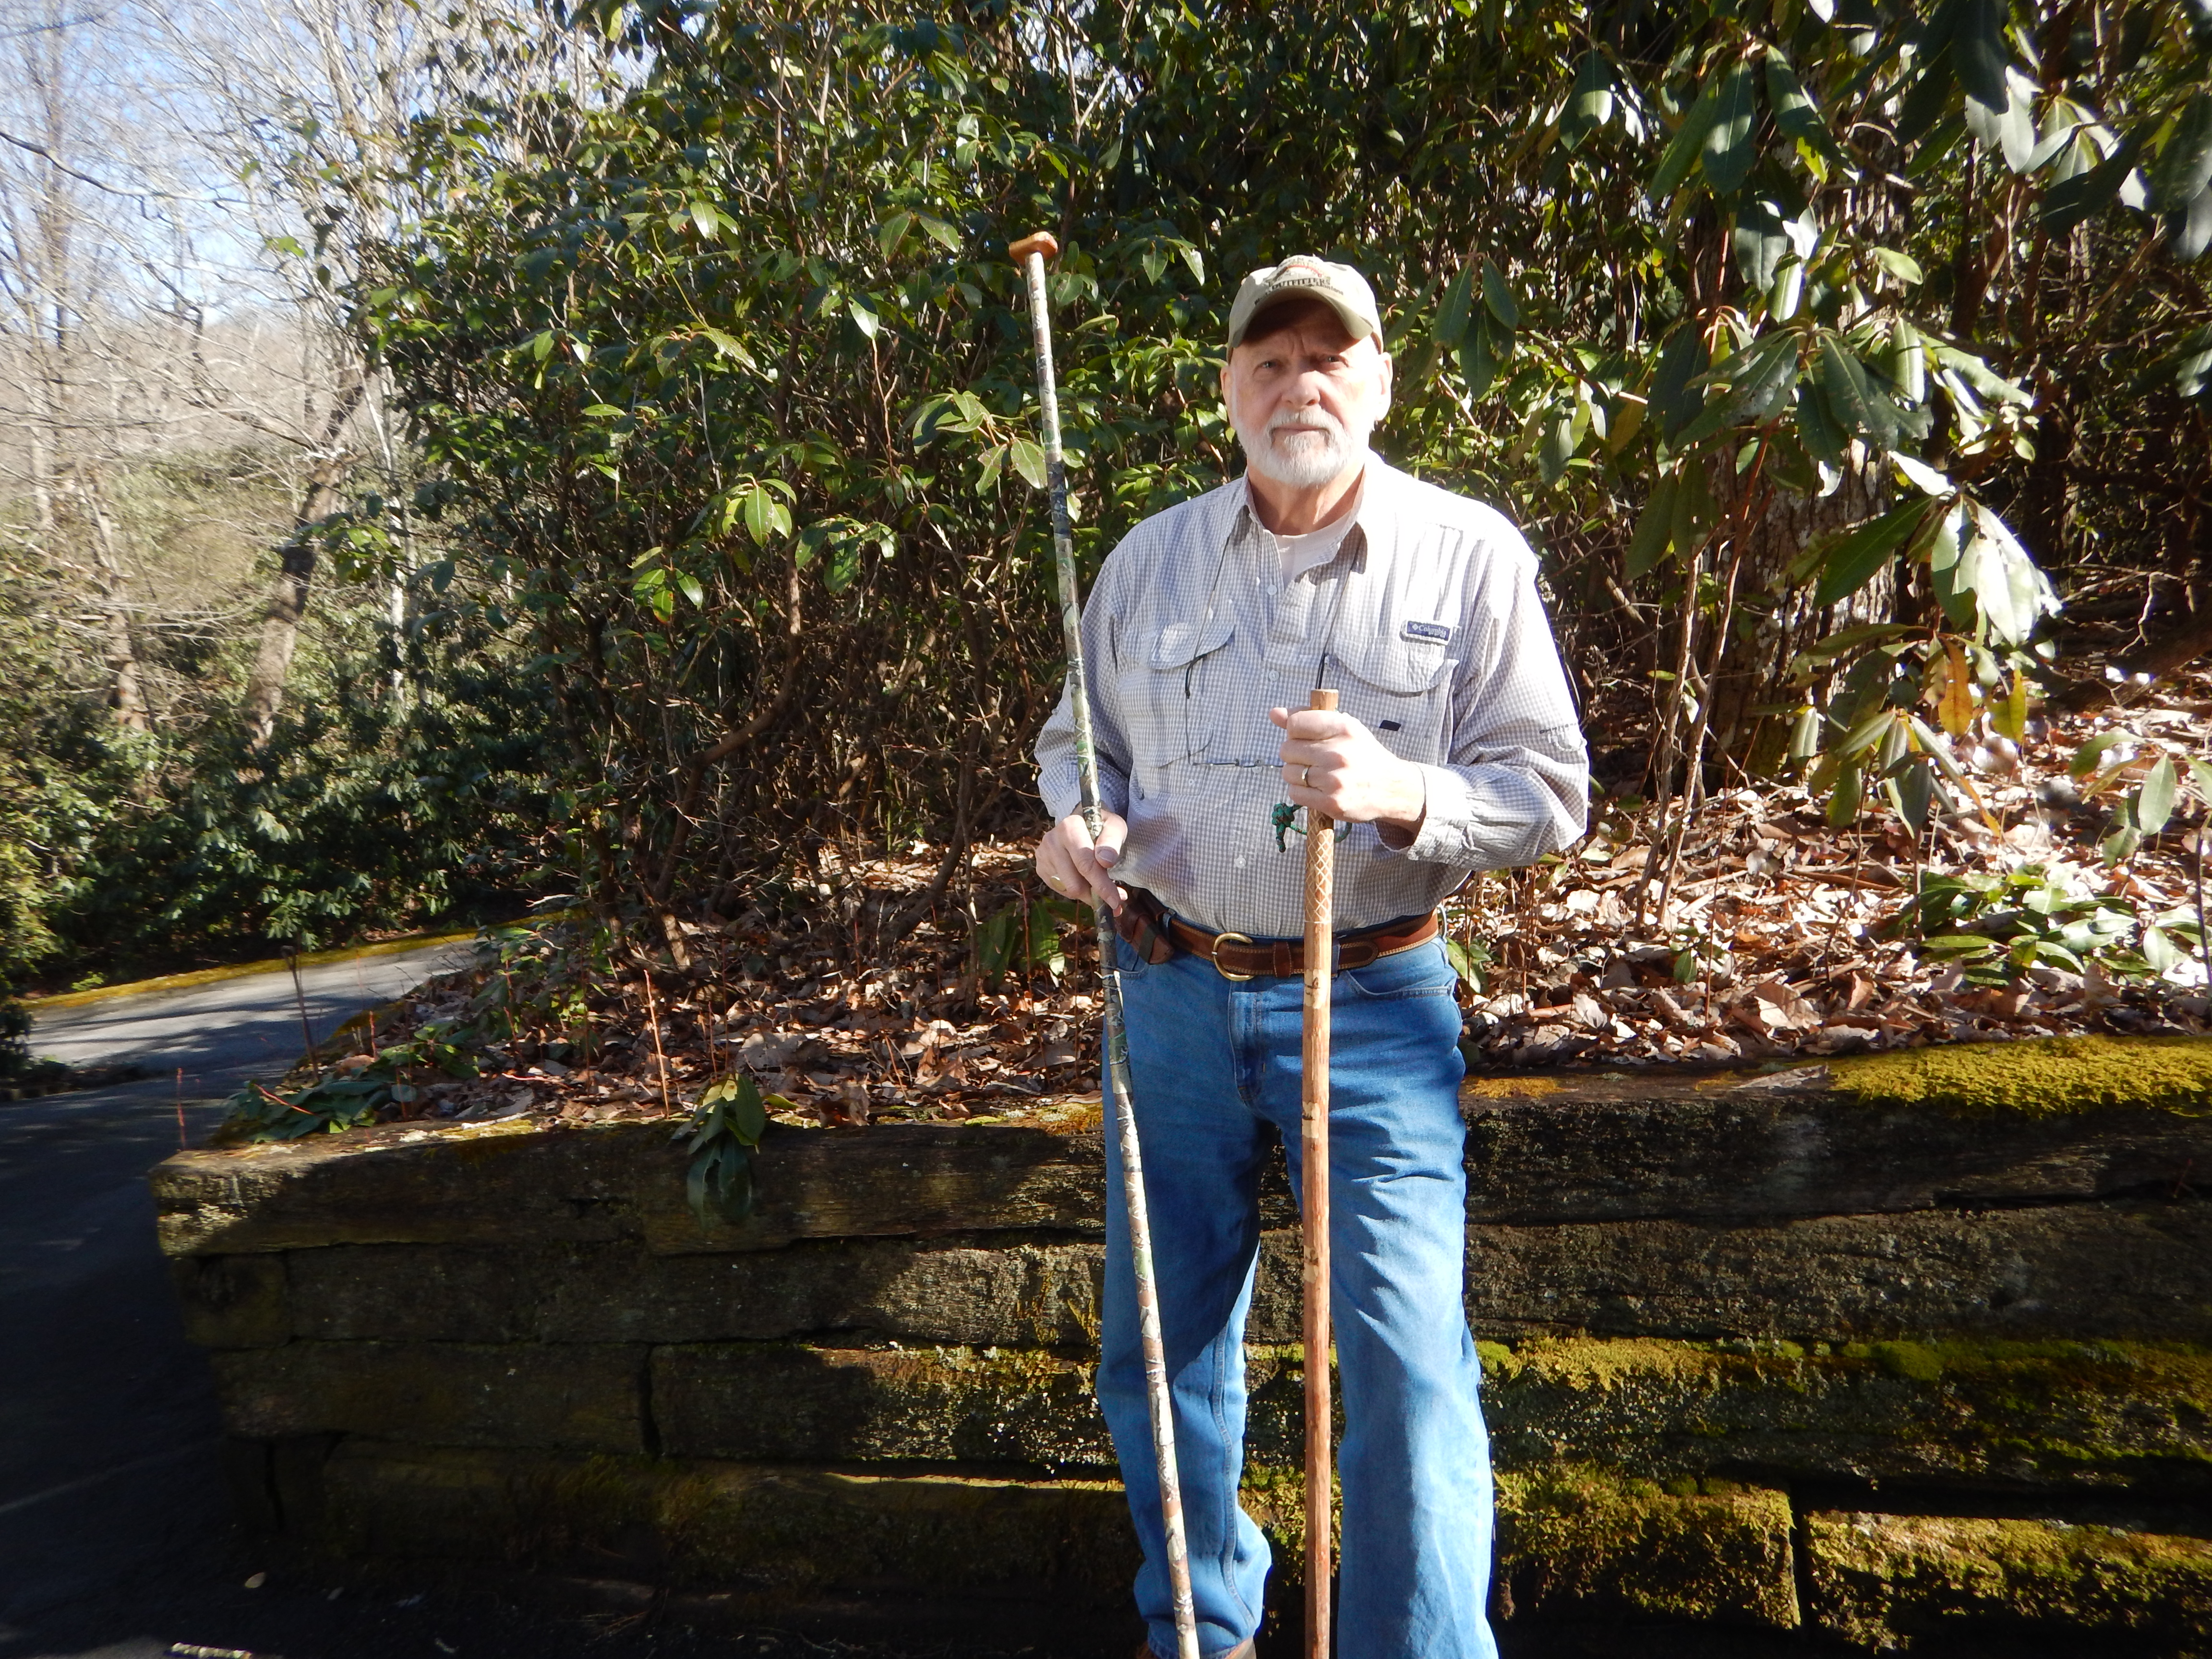 Author Profile: L. Woodrow Ross – An Outdoorsman For the Ages